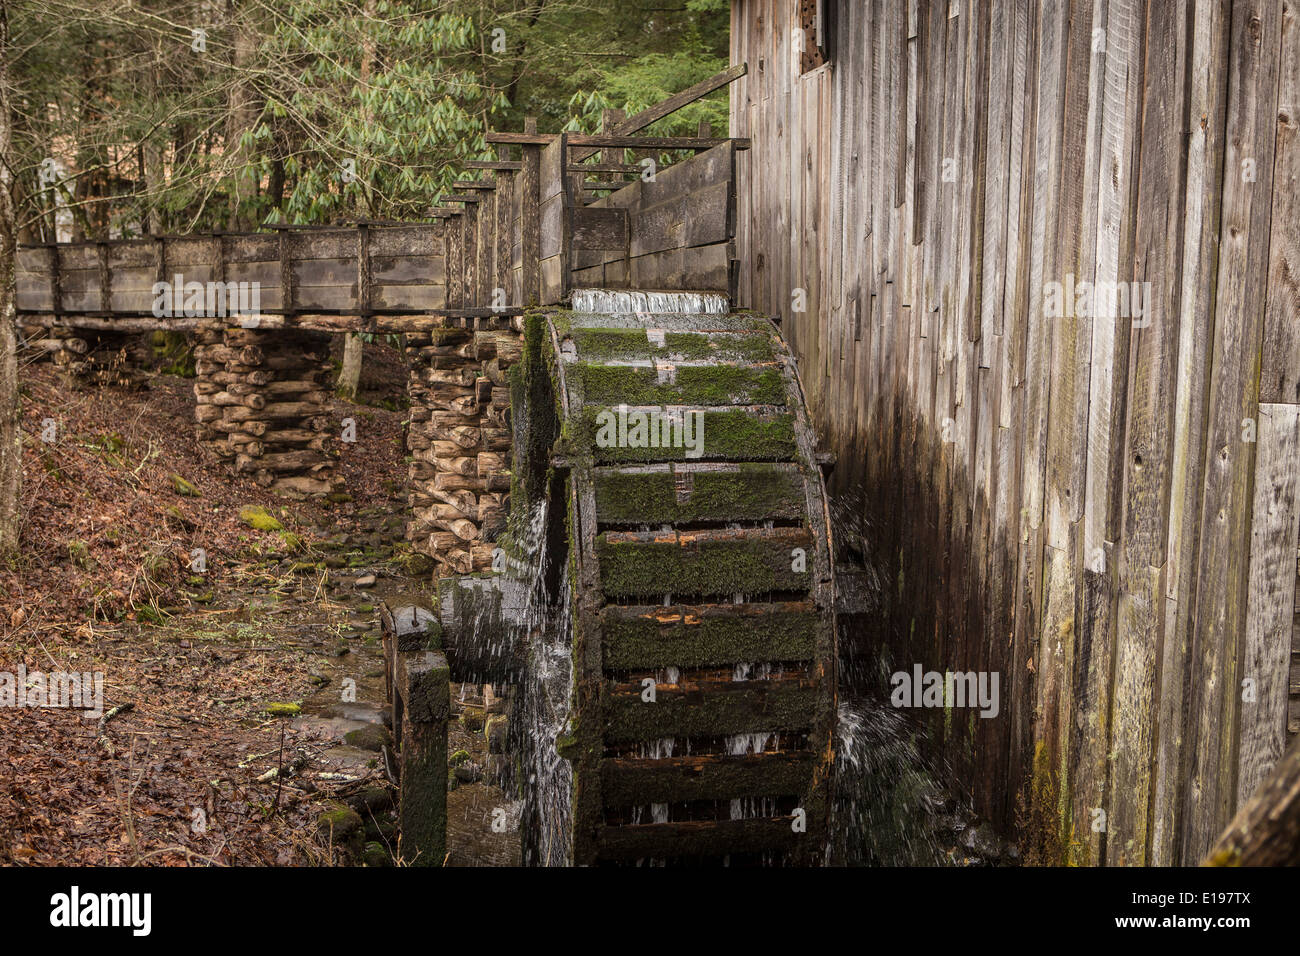 John Kabel Grist Mill ist in Cades Cove Gebiet des Great Smoky Mountains National Park in Tennessee abgebildet. Stockfoto